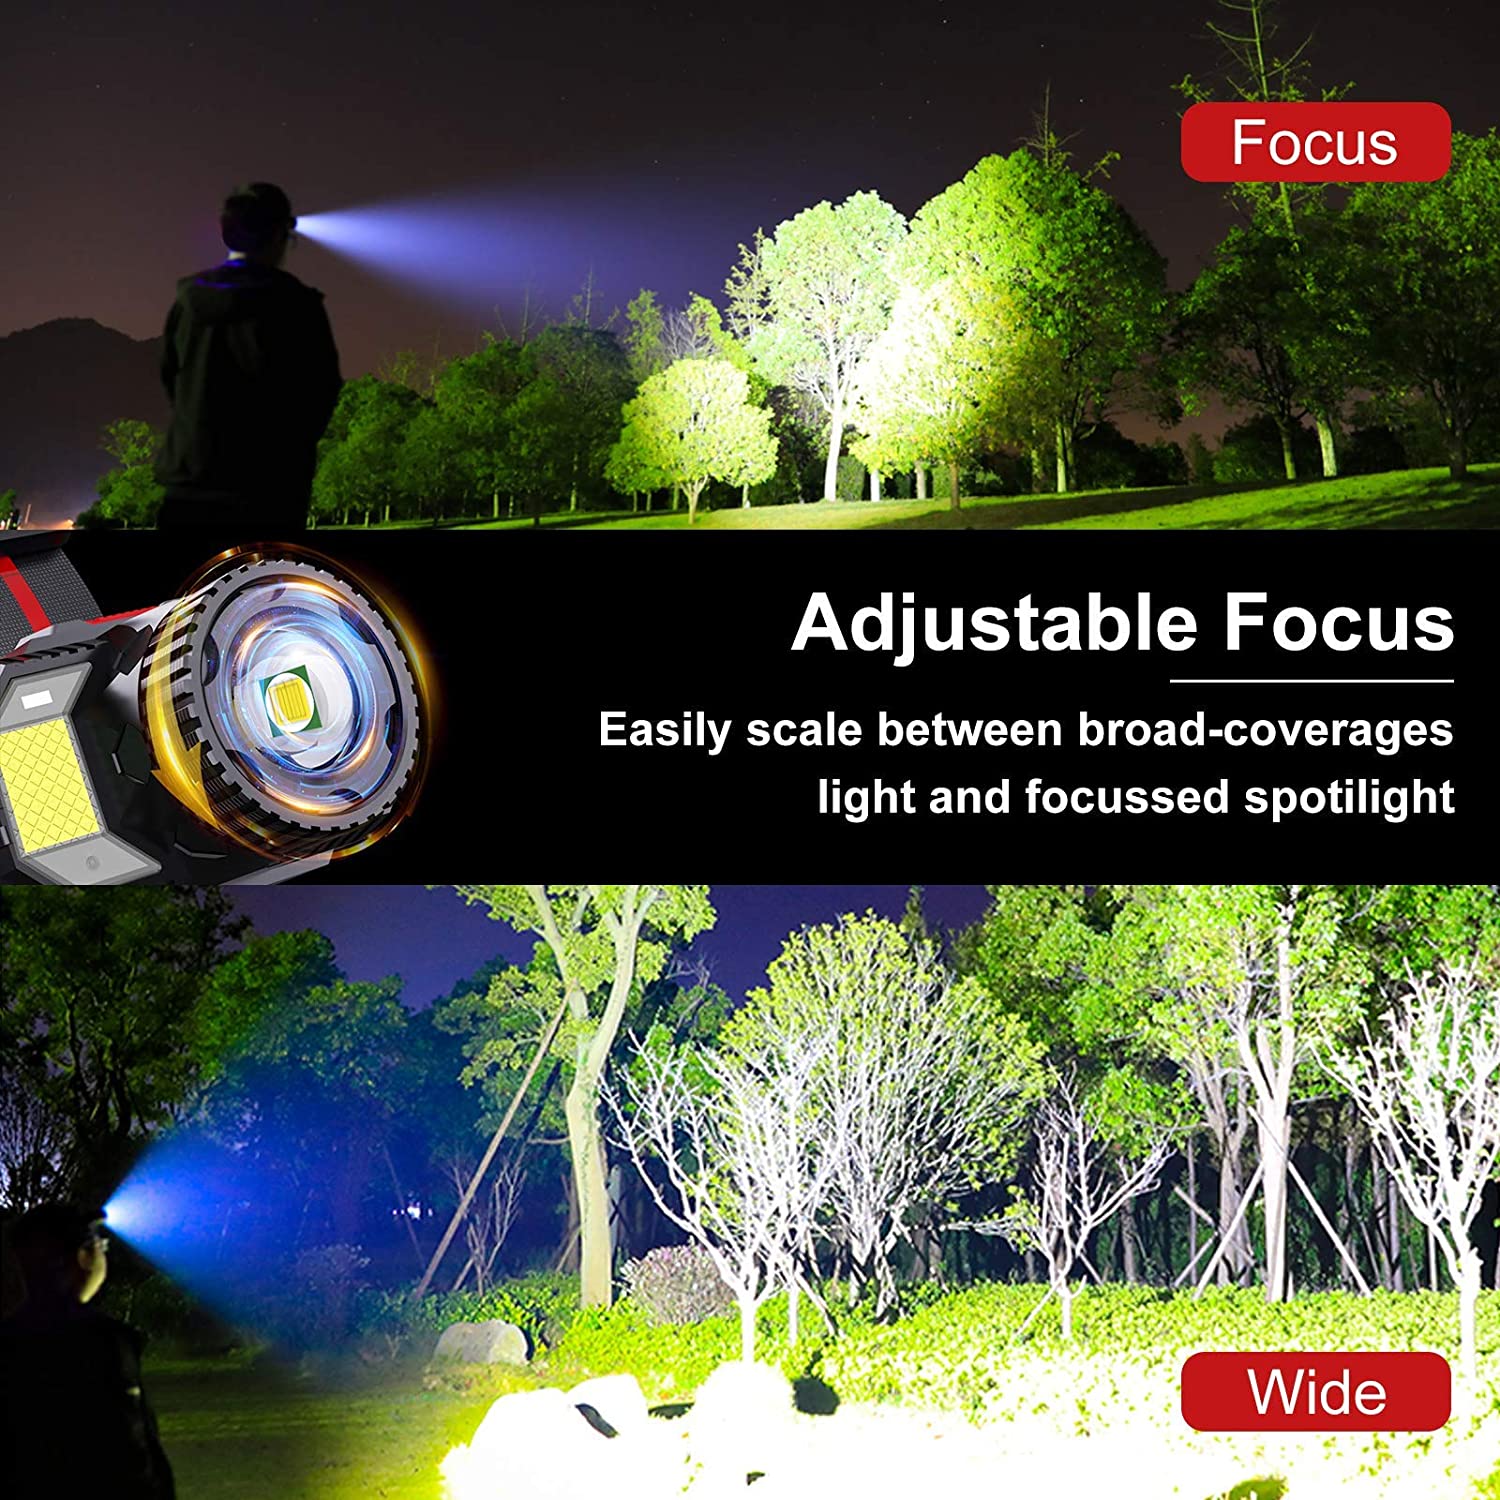 Rechargeable LED Headlamp with Motion Sensor, Zoom Function and SOS Lights for Outdoor Sports